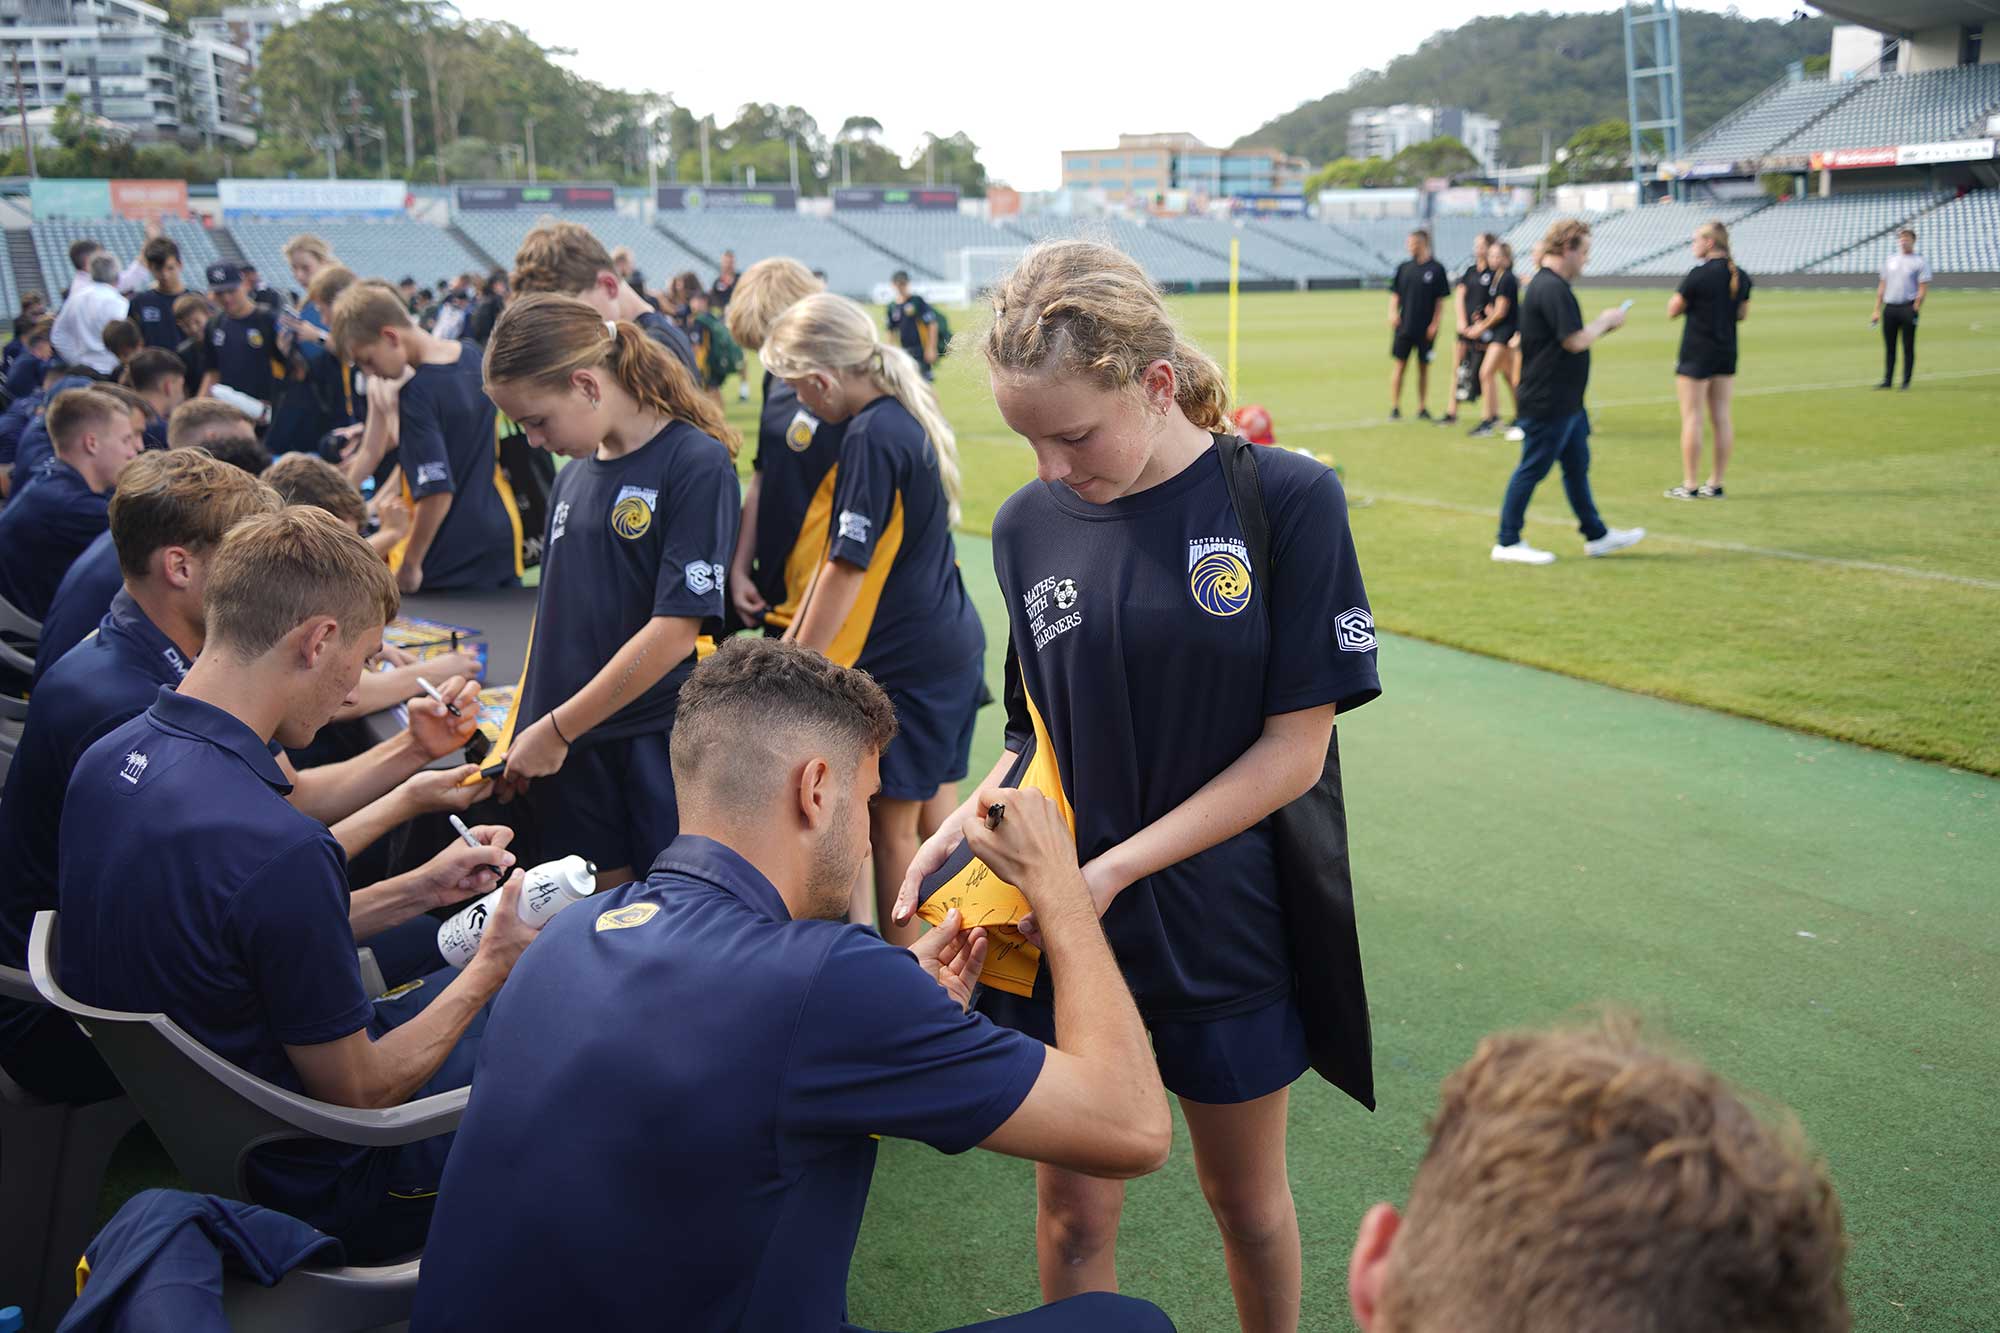 Maths with Mariners offered students in years 7 and 8 the chance to develop their maths skills while brushing shoulders with Central Coast Mariners players. 